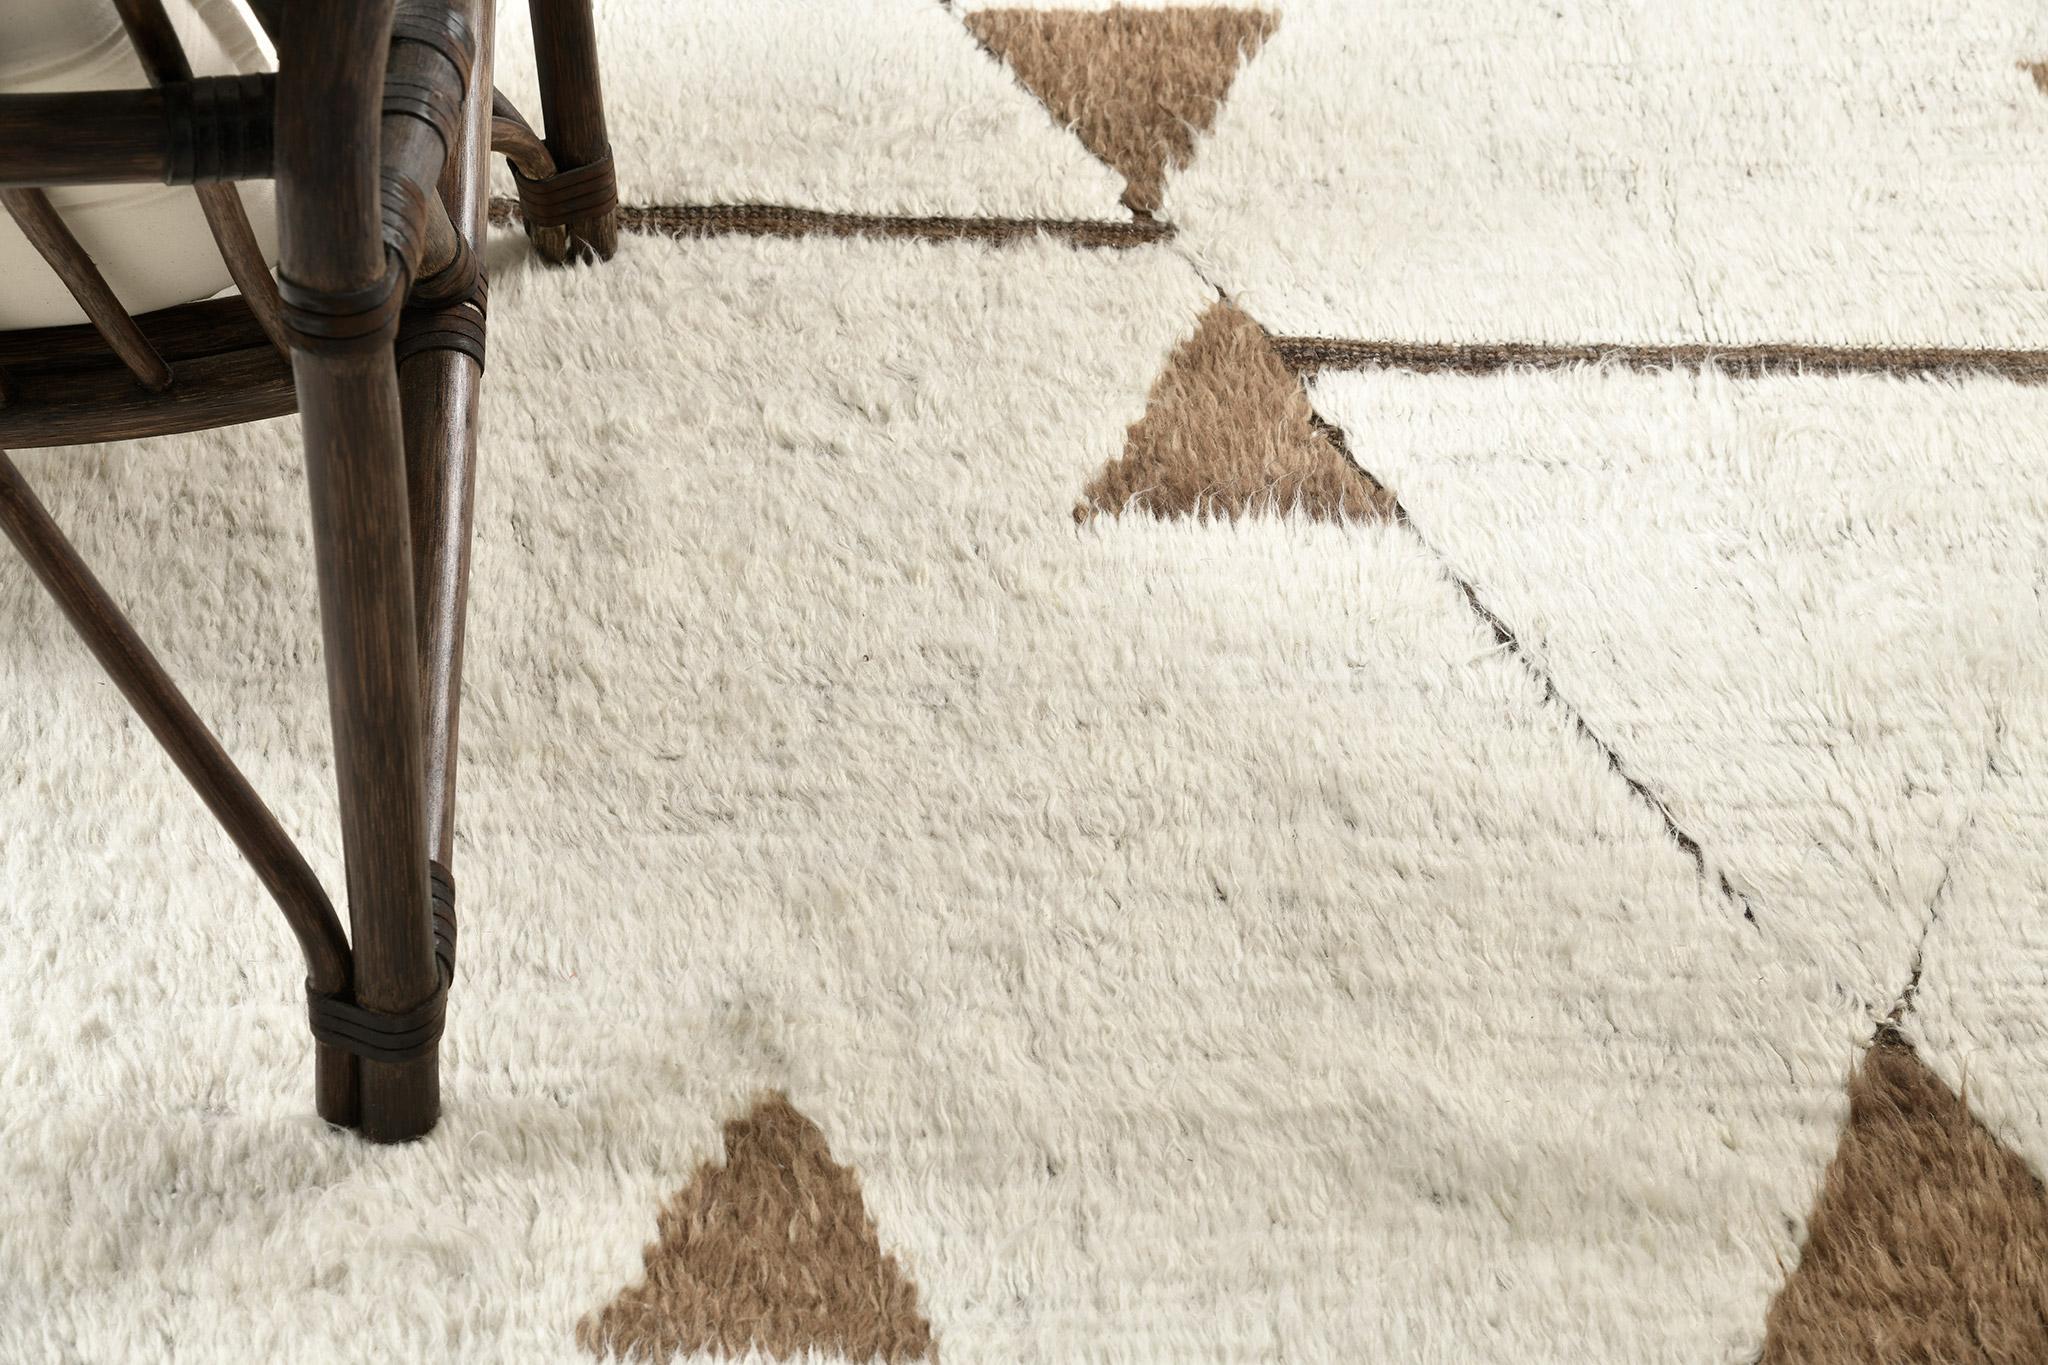 Darbu' is a tasteful handwoven wool piece in a perfect geometric design. The contrasting ivory and brown colors work cohesively to make for a great contemporary interpretation for the modern design world. Mehraban's Atlas collection is noted for